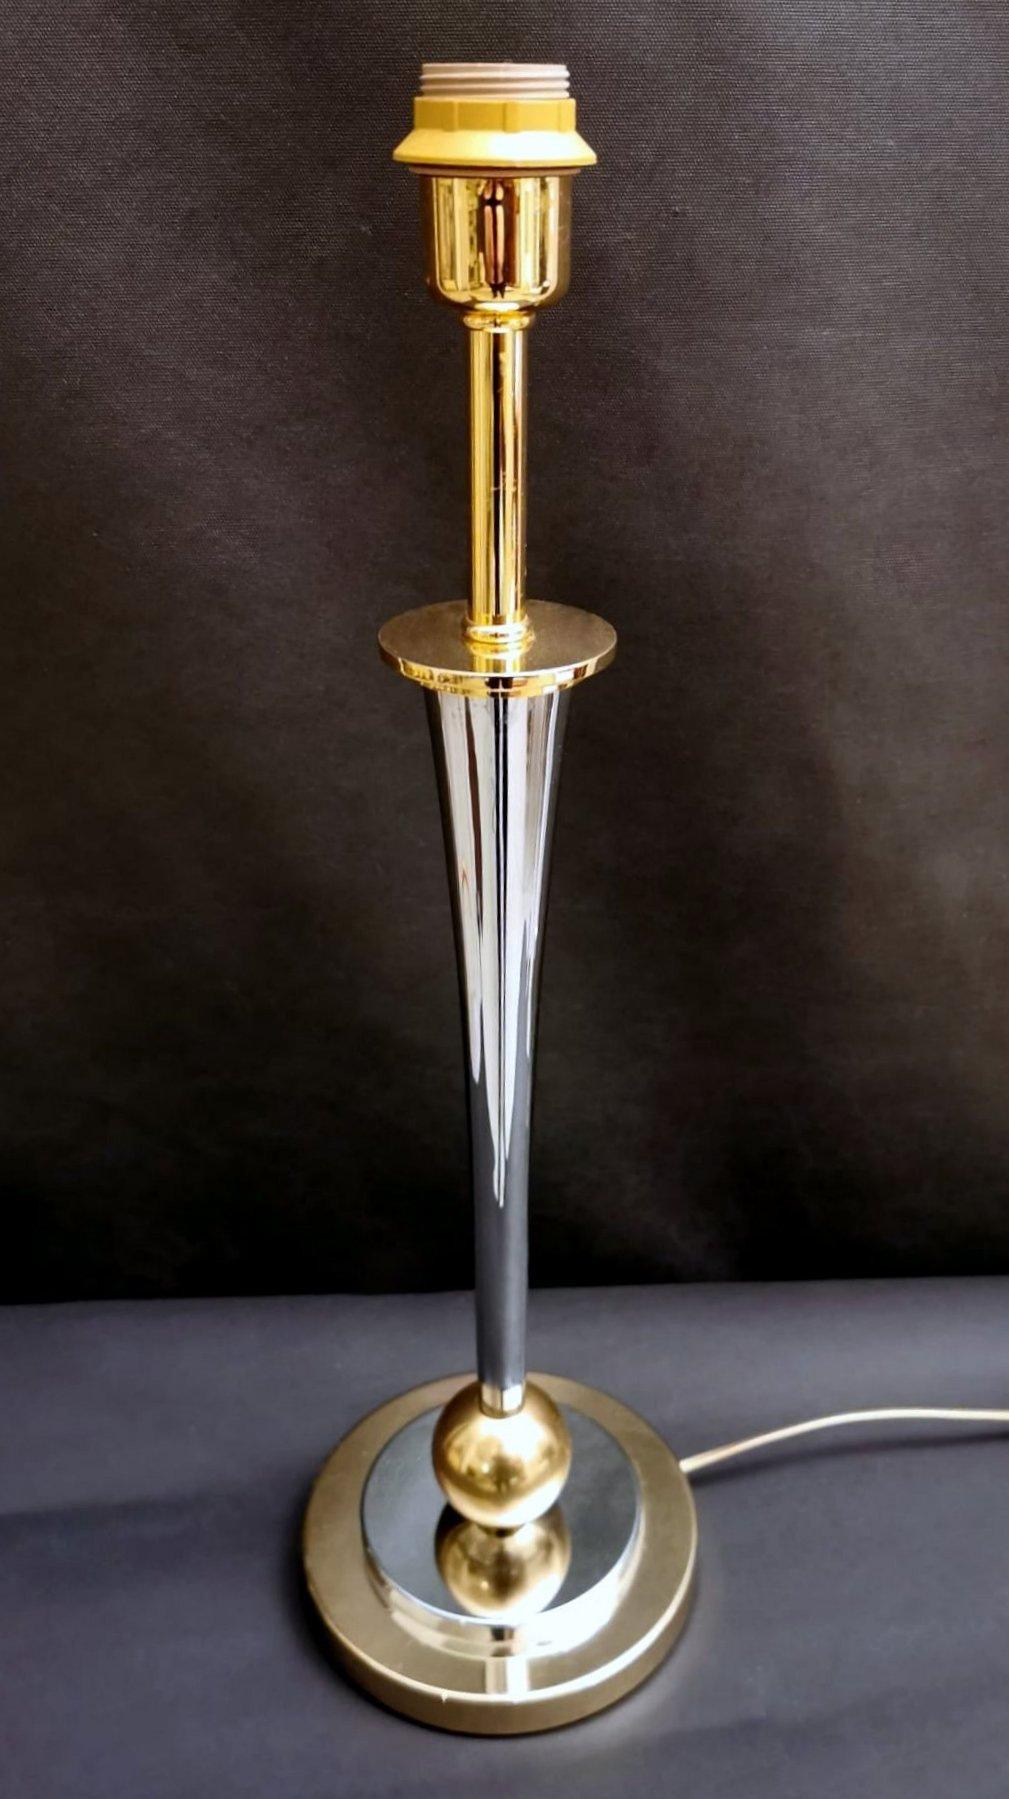 We kindly suggest you read the whole description, because with it we try to give you detailed technical and historical information to guarantee the authenticity of our objects.
Elegant and linear lamp in nickel and gilded brass; the solid round